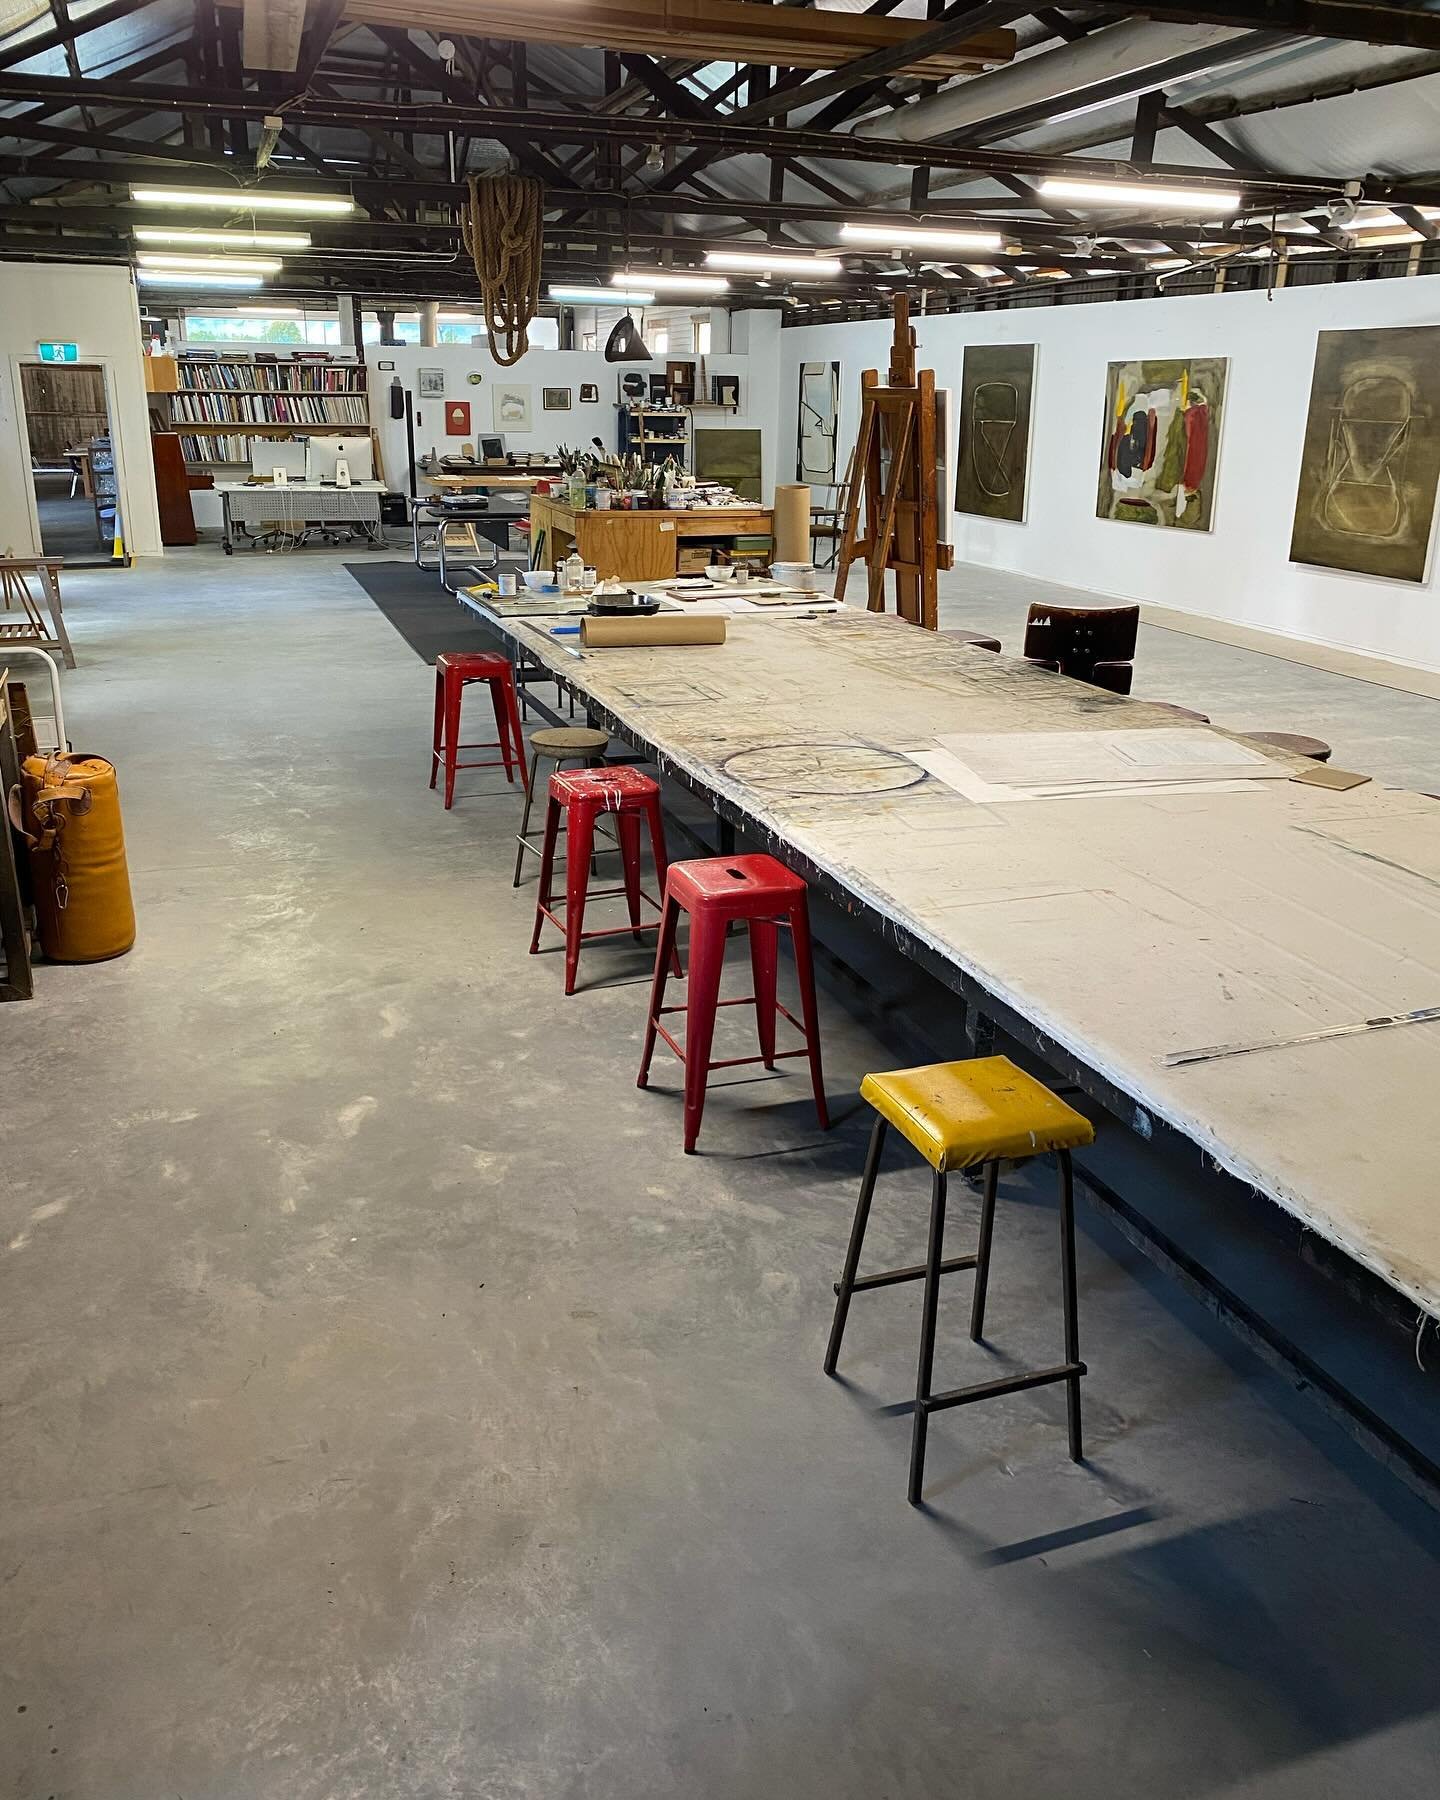 Byron School of Art has been fortunate enough to be a recipient of &nbsp;CLIRP Arts and Culture Priority Needs Program funding from the NSW Government. This program provides funding to support assessment and planning and urgent small-scale repair and